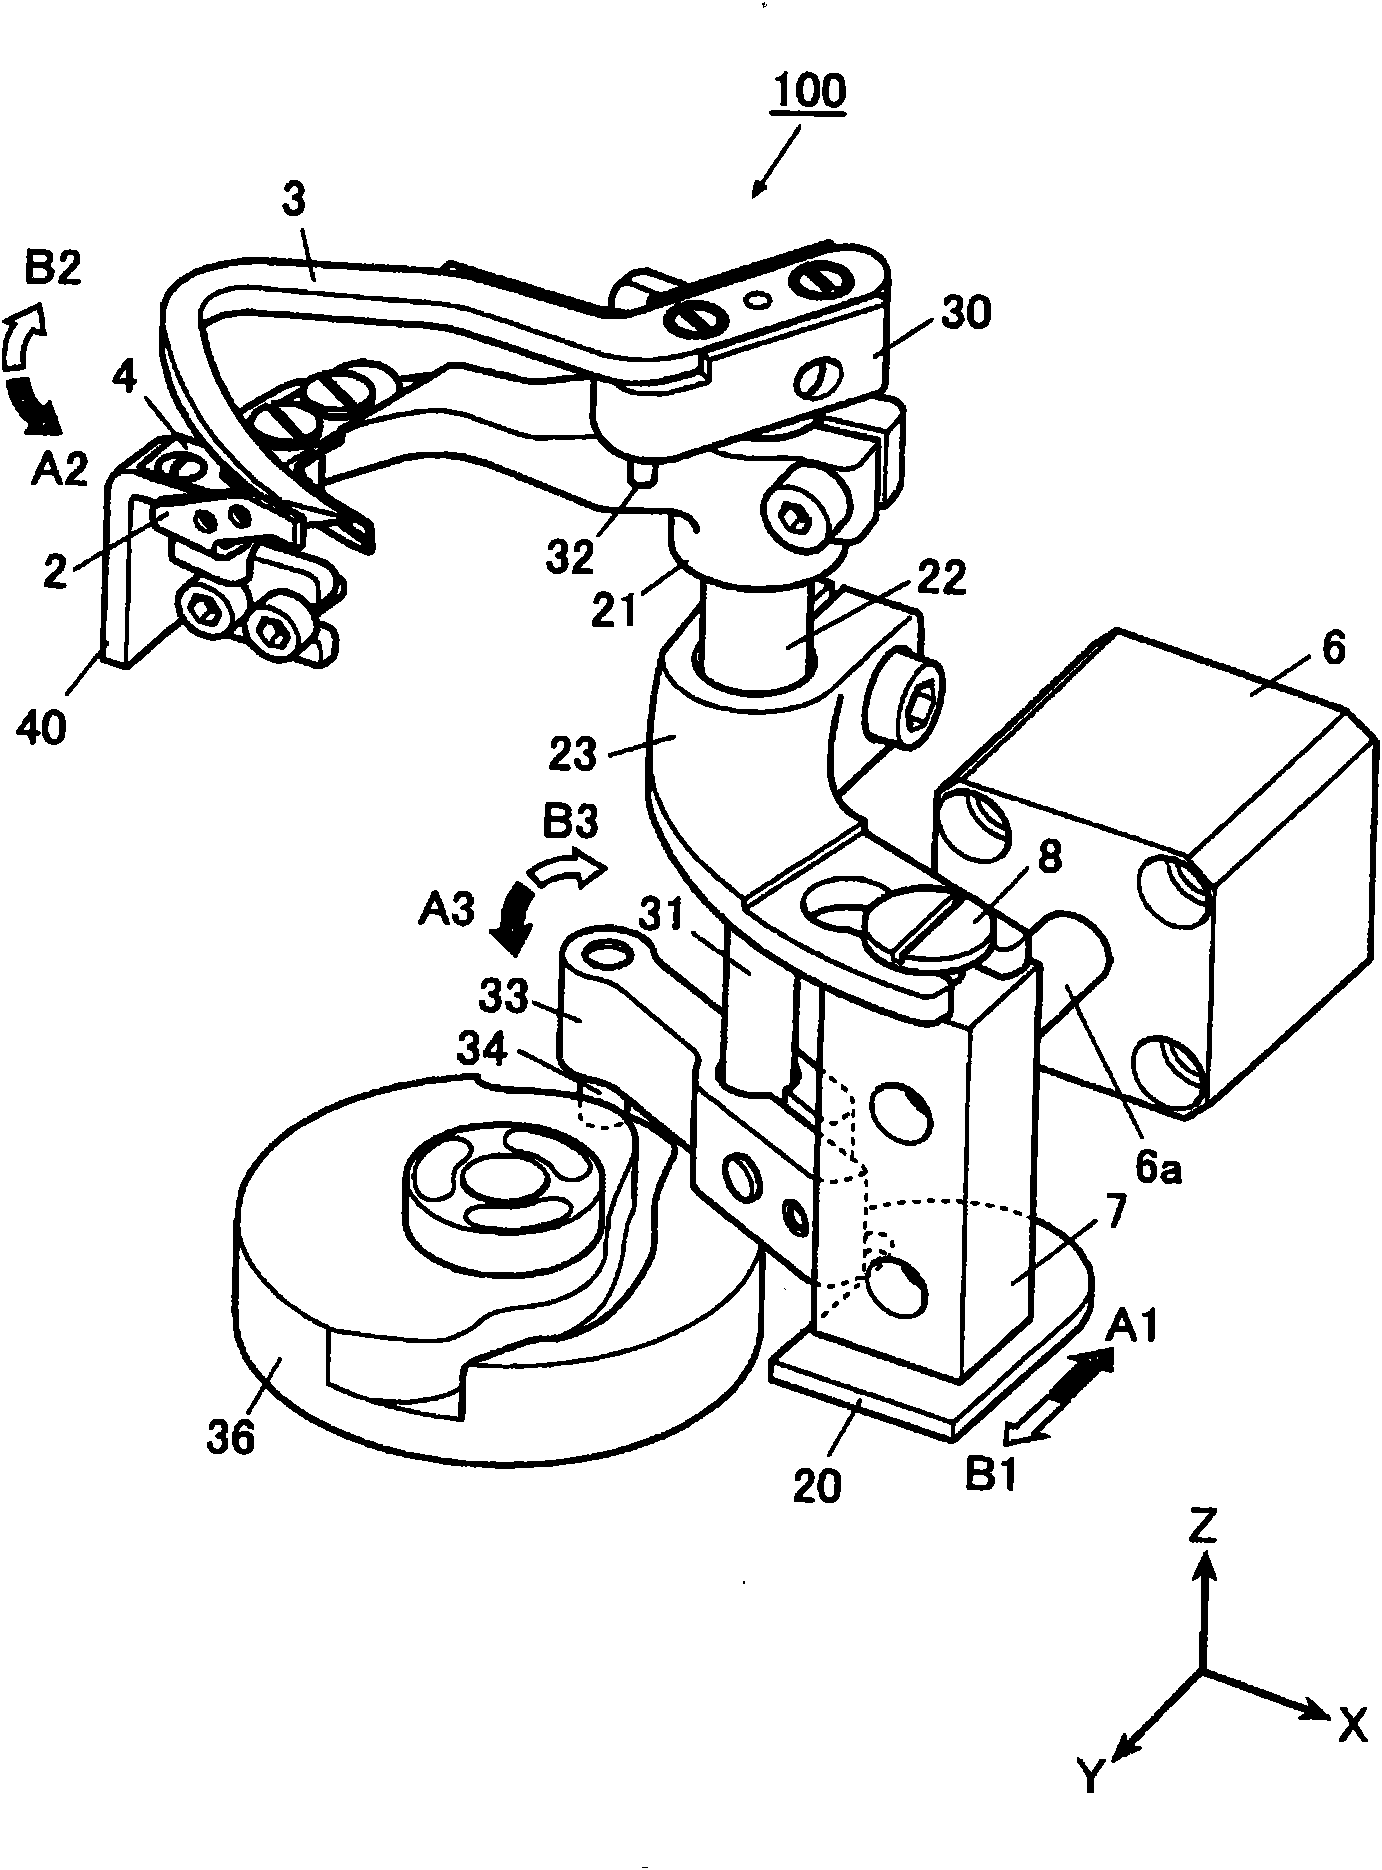 Thread cutting device for sewing machine